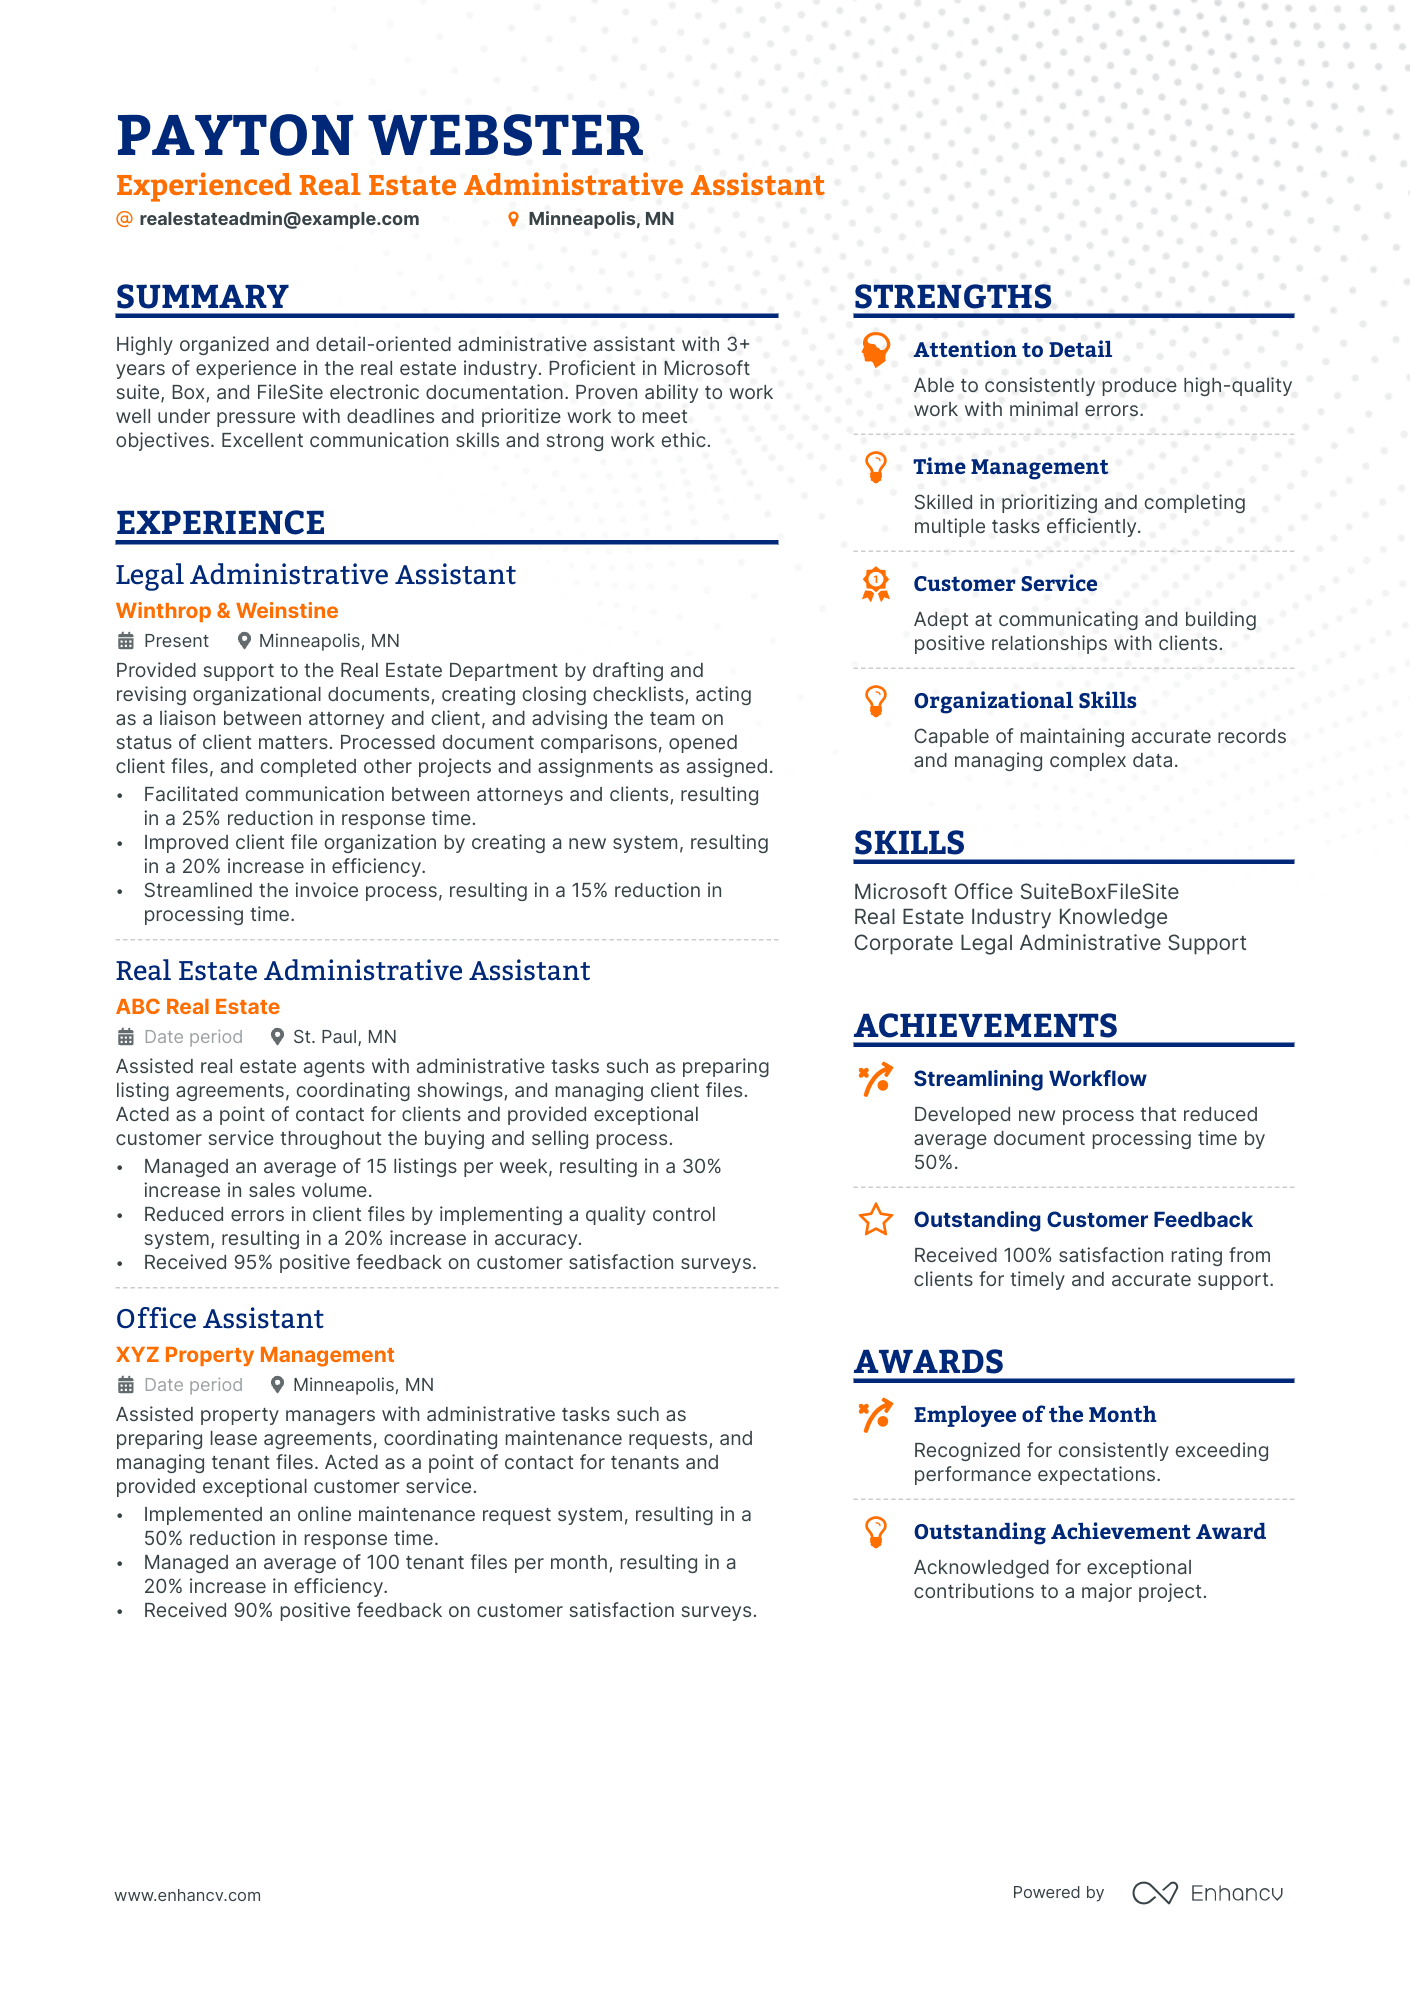 Real Estate Administrative Assistant resume example